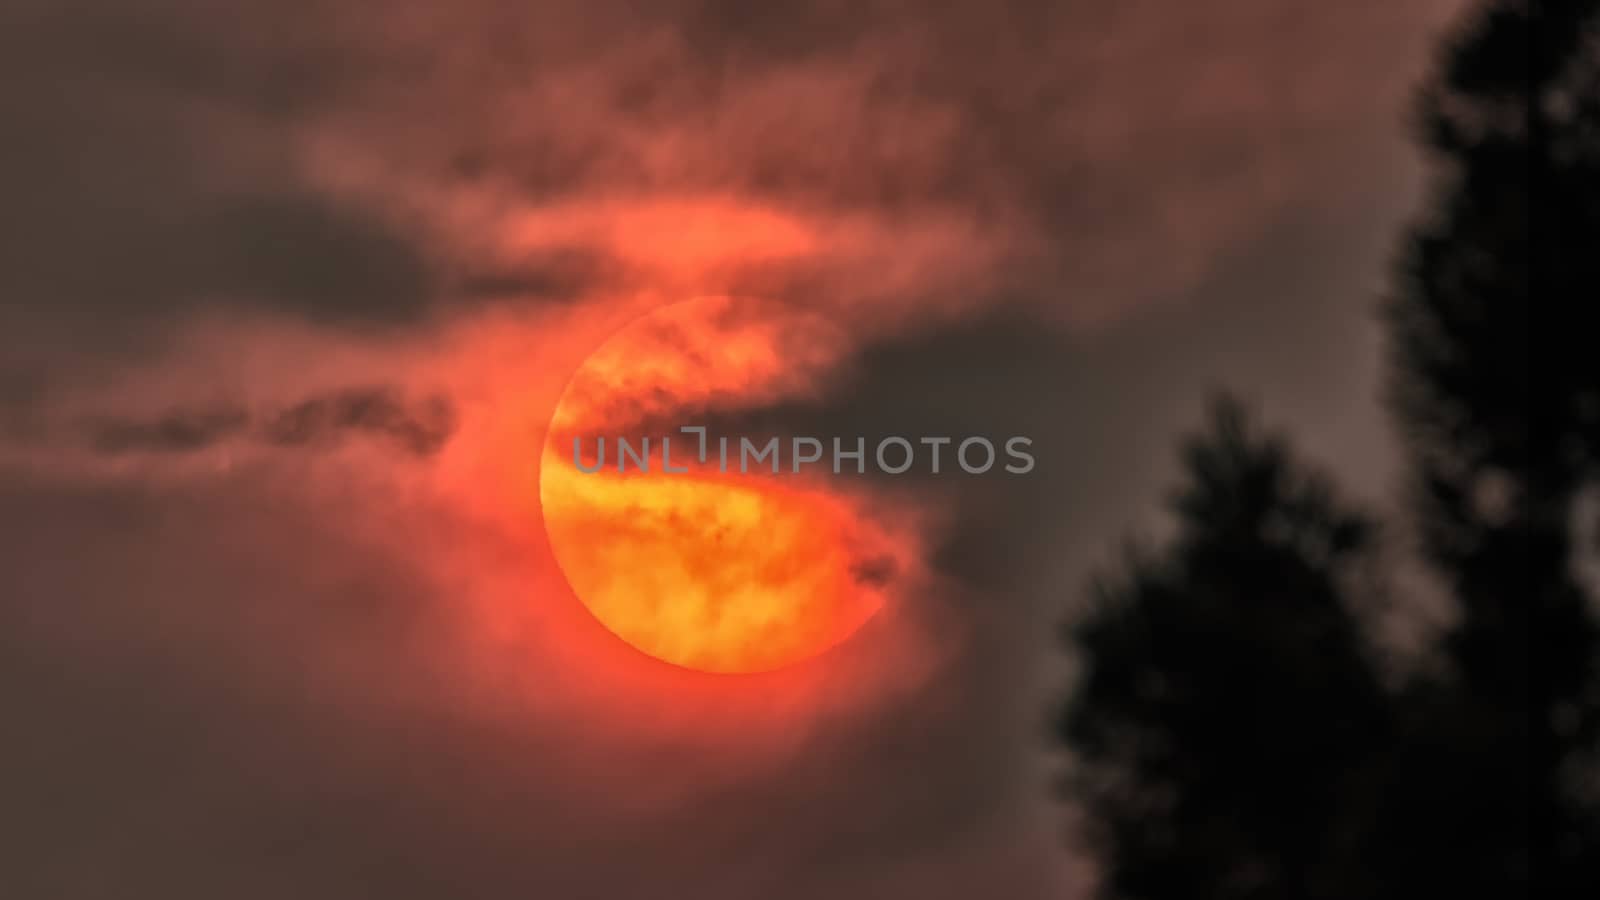 The Sun Obscured by Wildfire Smoke, Humboldt County, California by backyard_photography